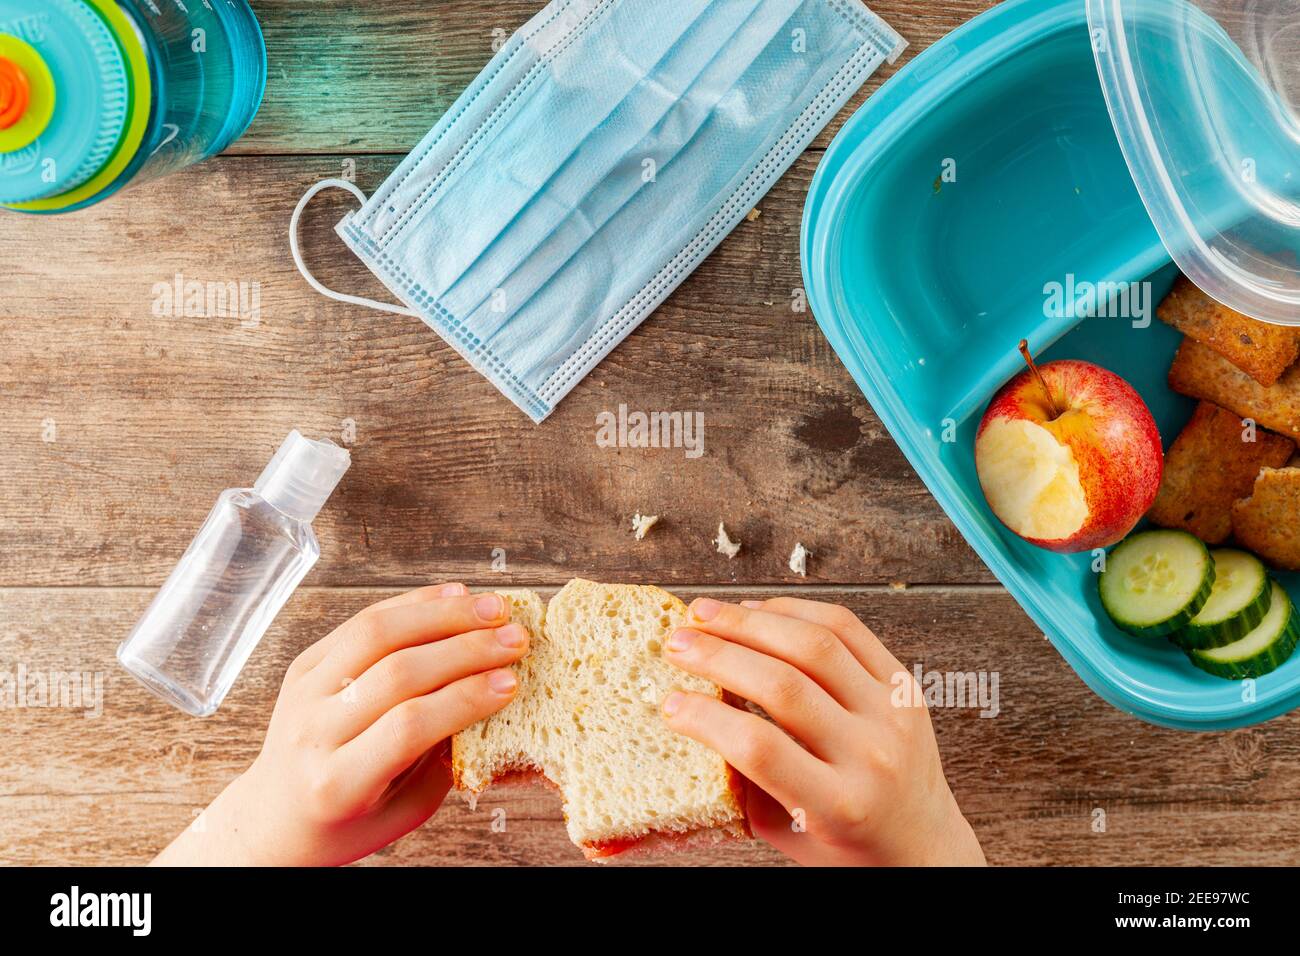 Flat lay image with eating lunch at school concept during the phased reopening after COVID-19 pandemic closures. Snack in containers as well as water Stock Photo